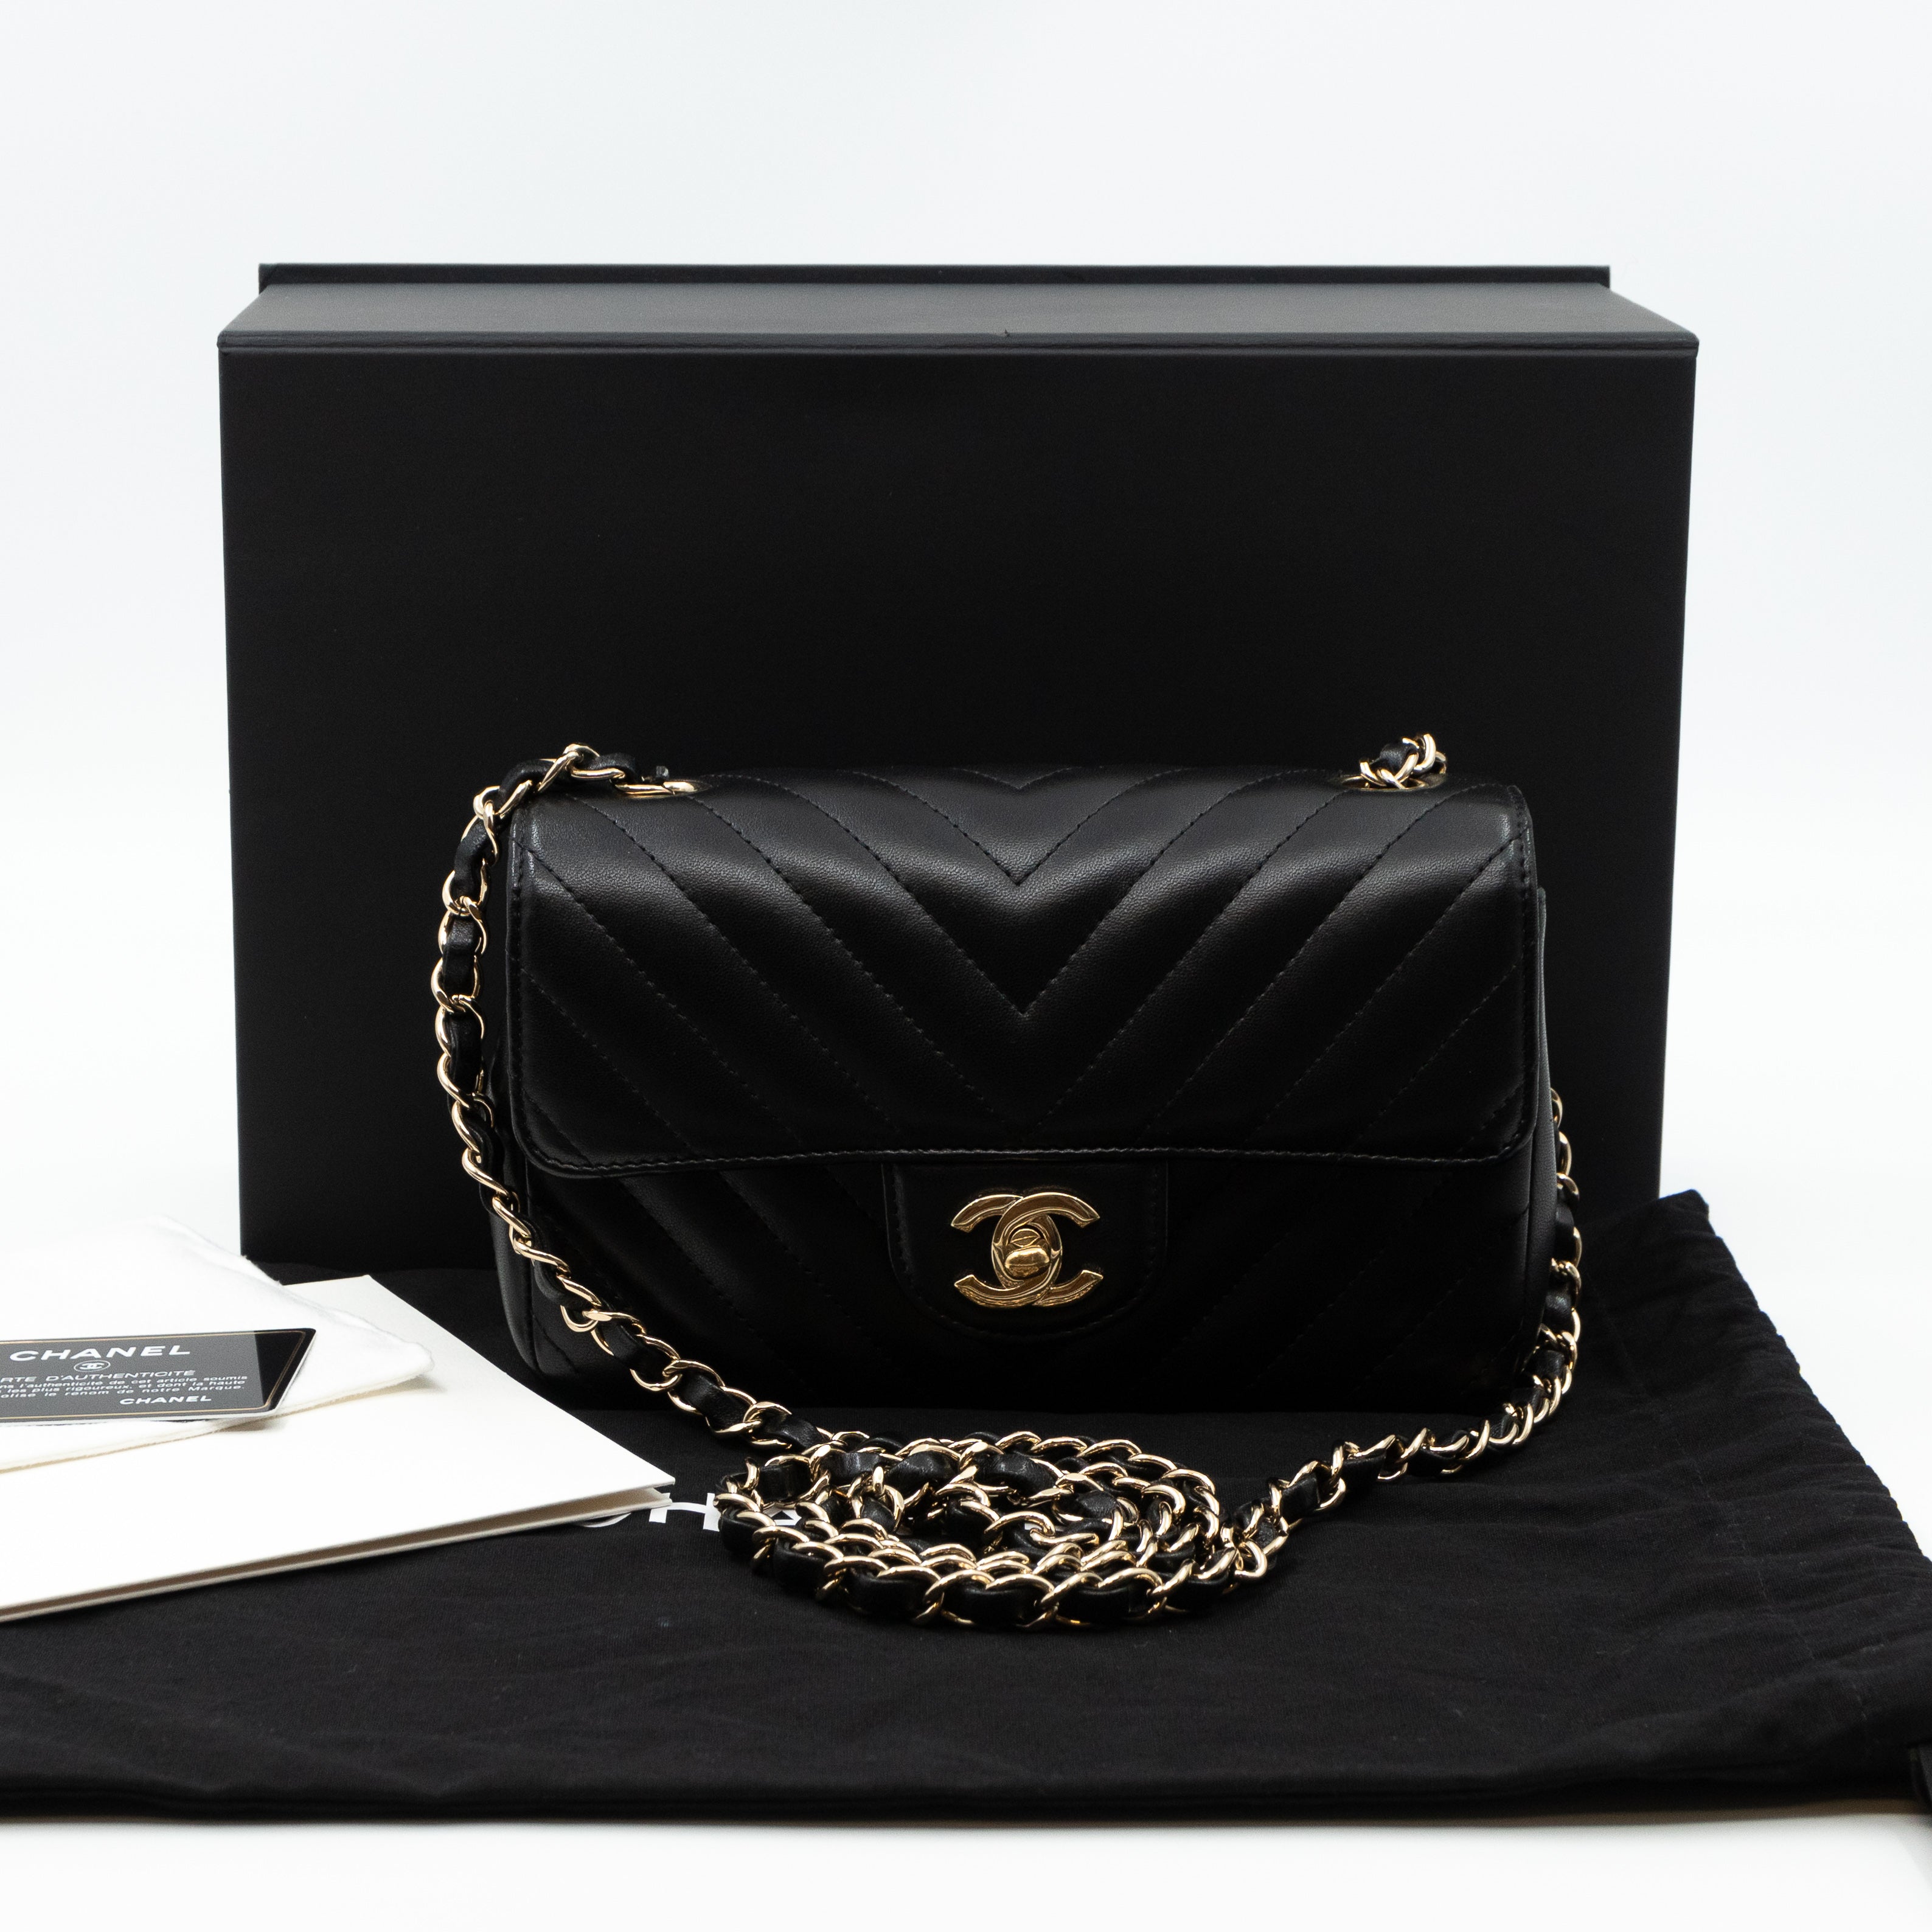 Chanel - Black Quilted Patent Leather Classic Square Flap Mini